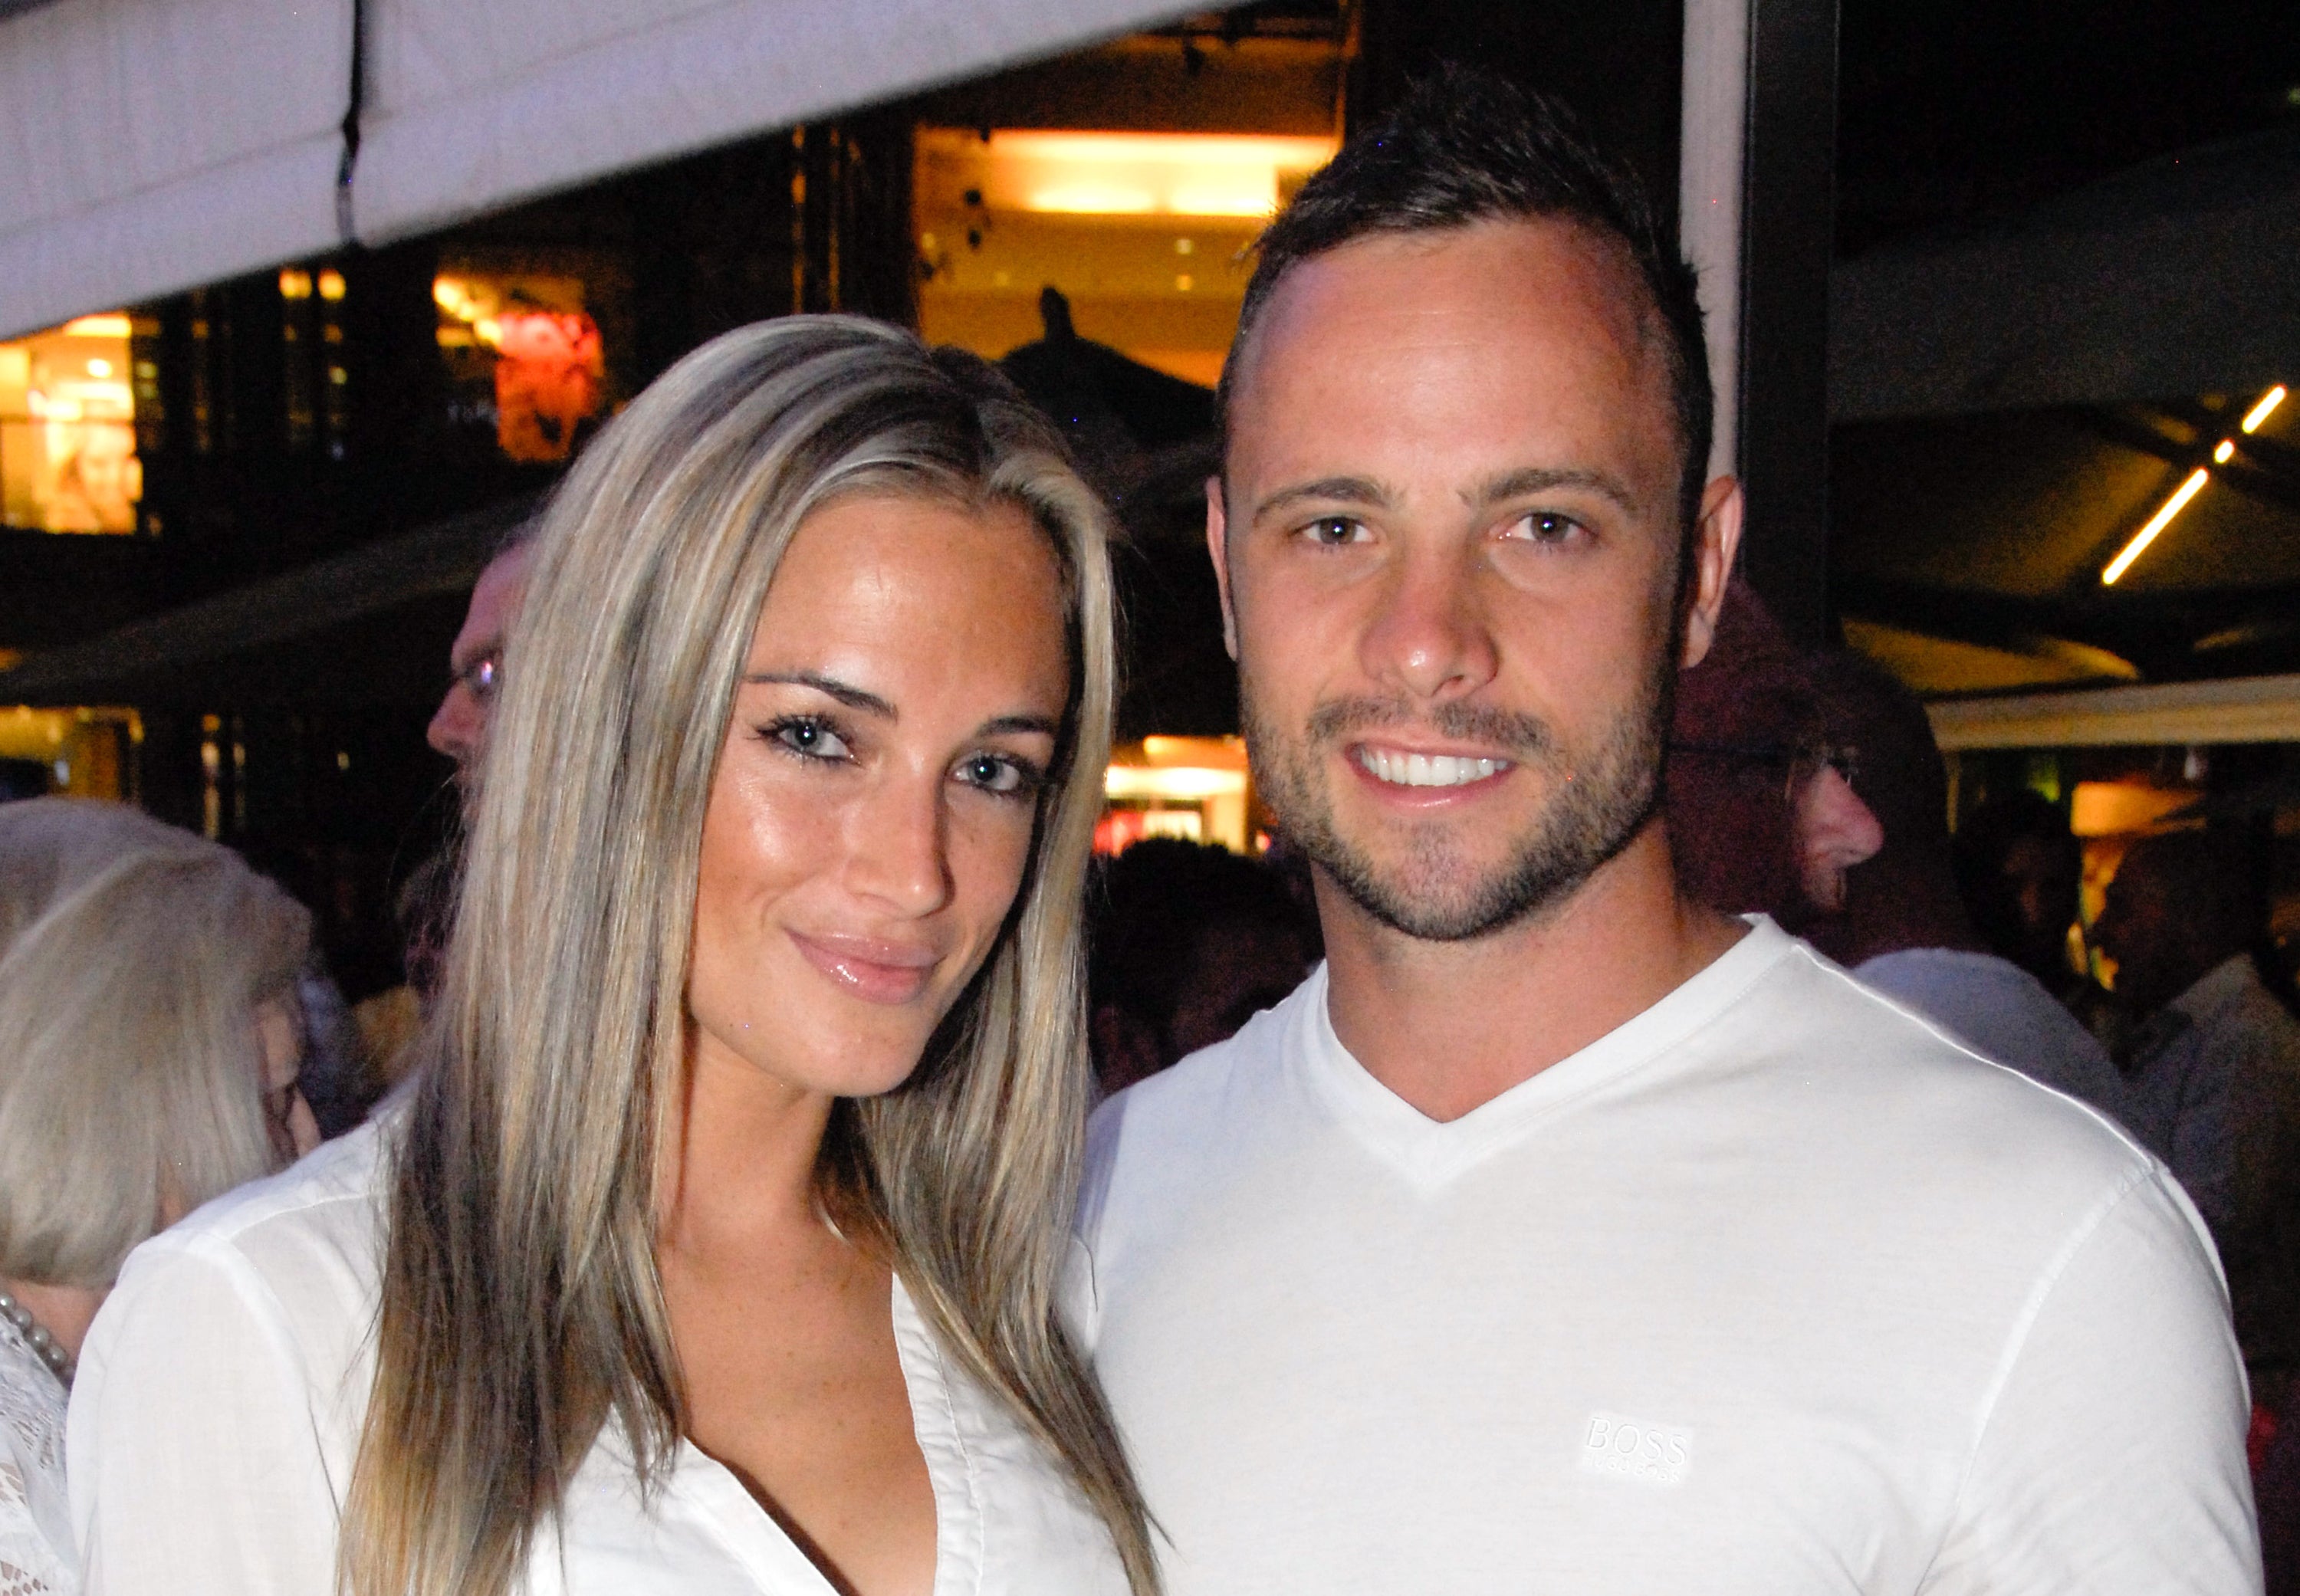 Steenkamp with Pistorius less than a month before her death